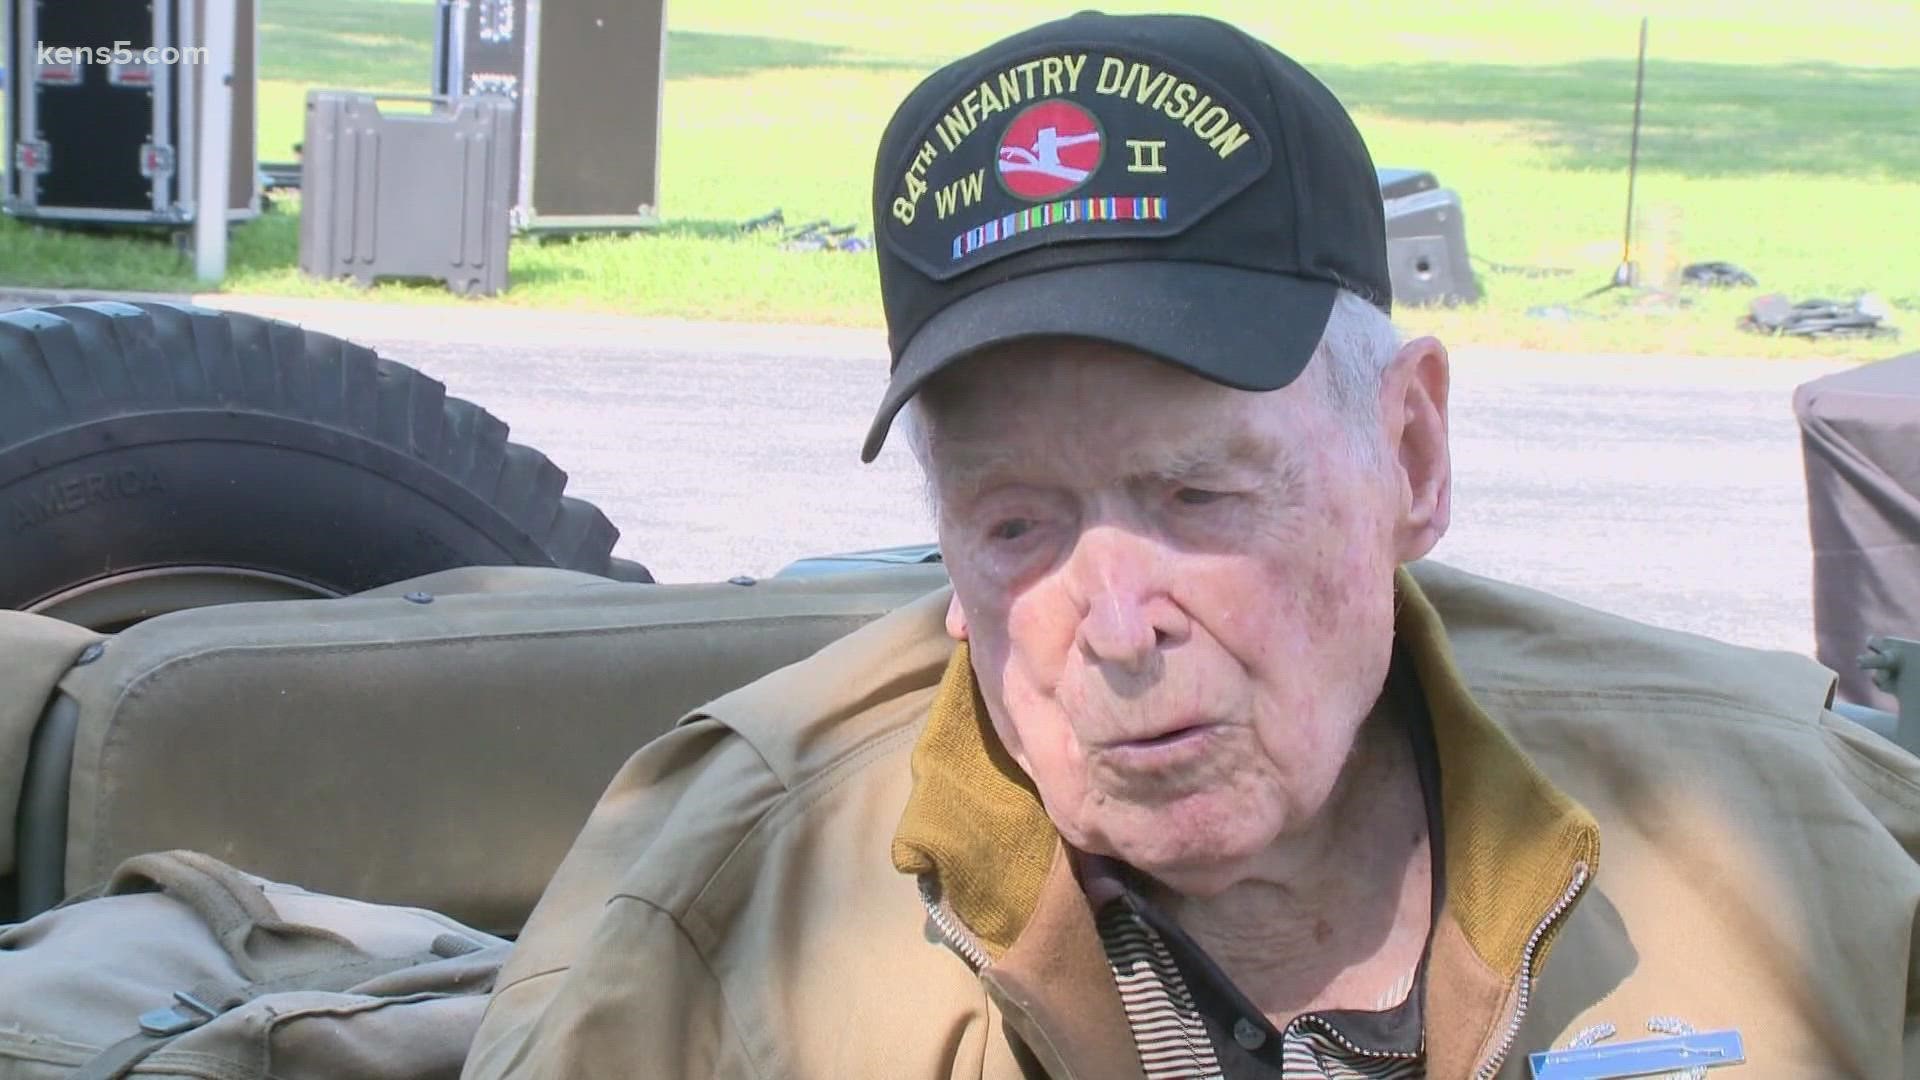 Reid Clanton hitchhiked home to Corpus Christi after returning from World War II, where he fought in D-Day and the Battle of the Bulge.